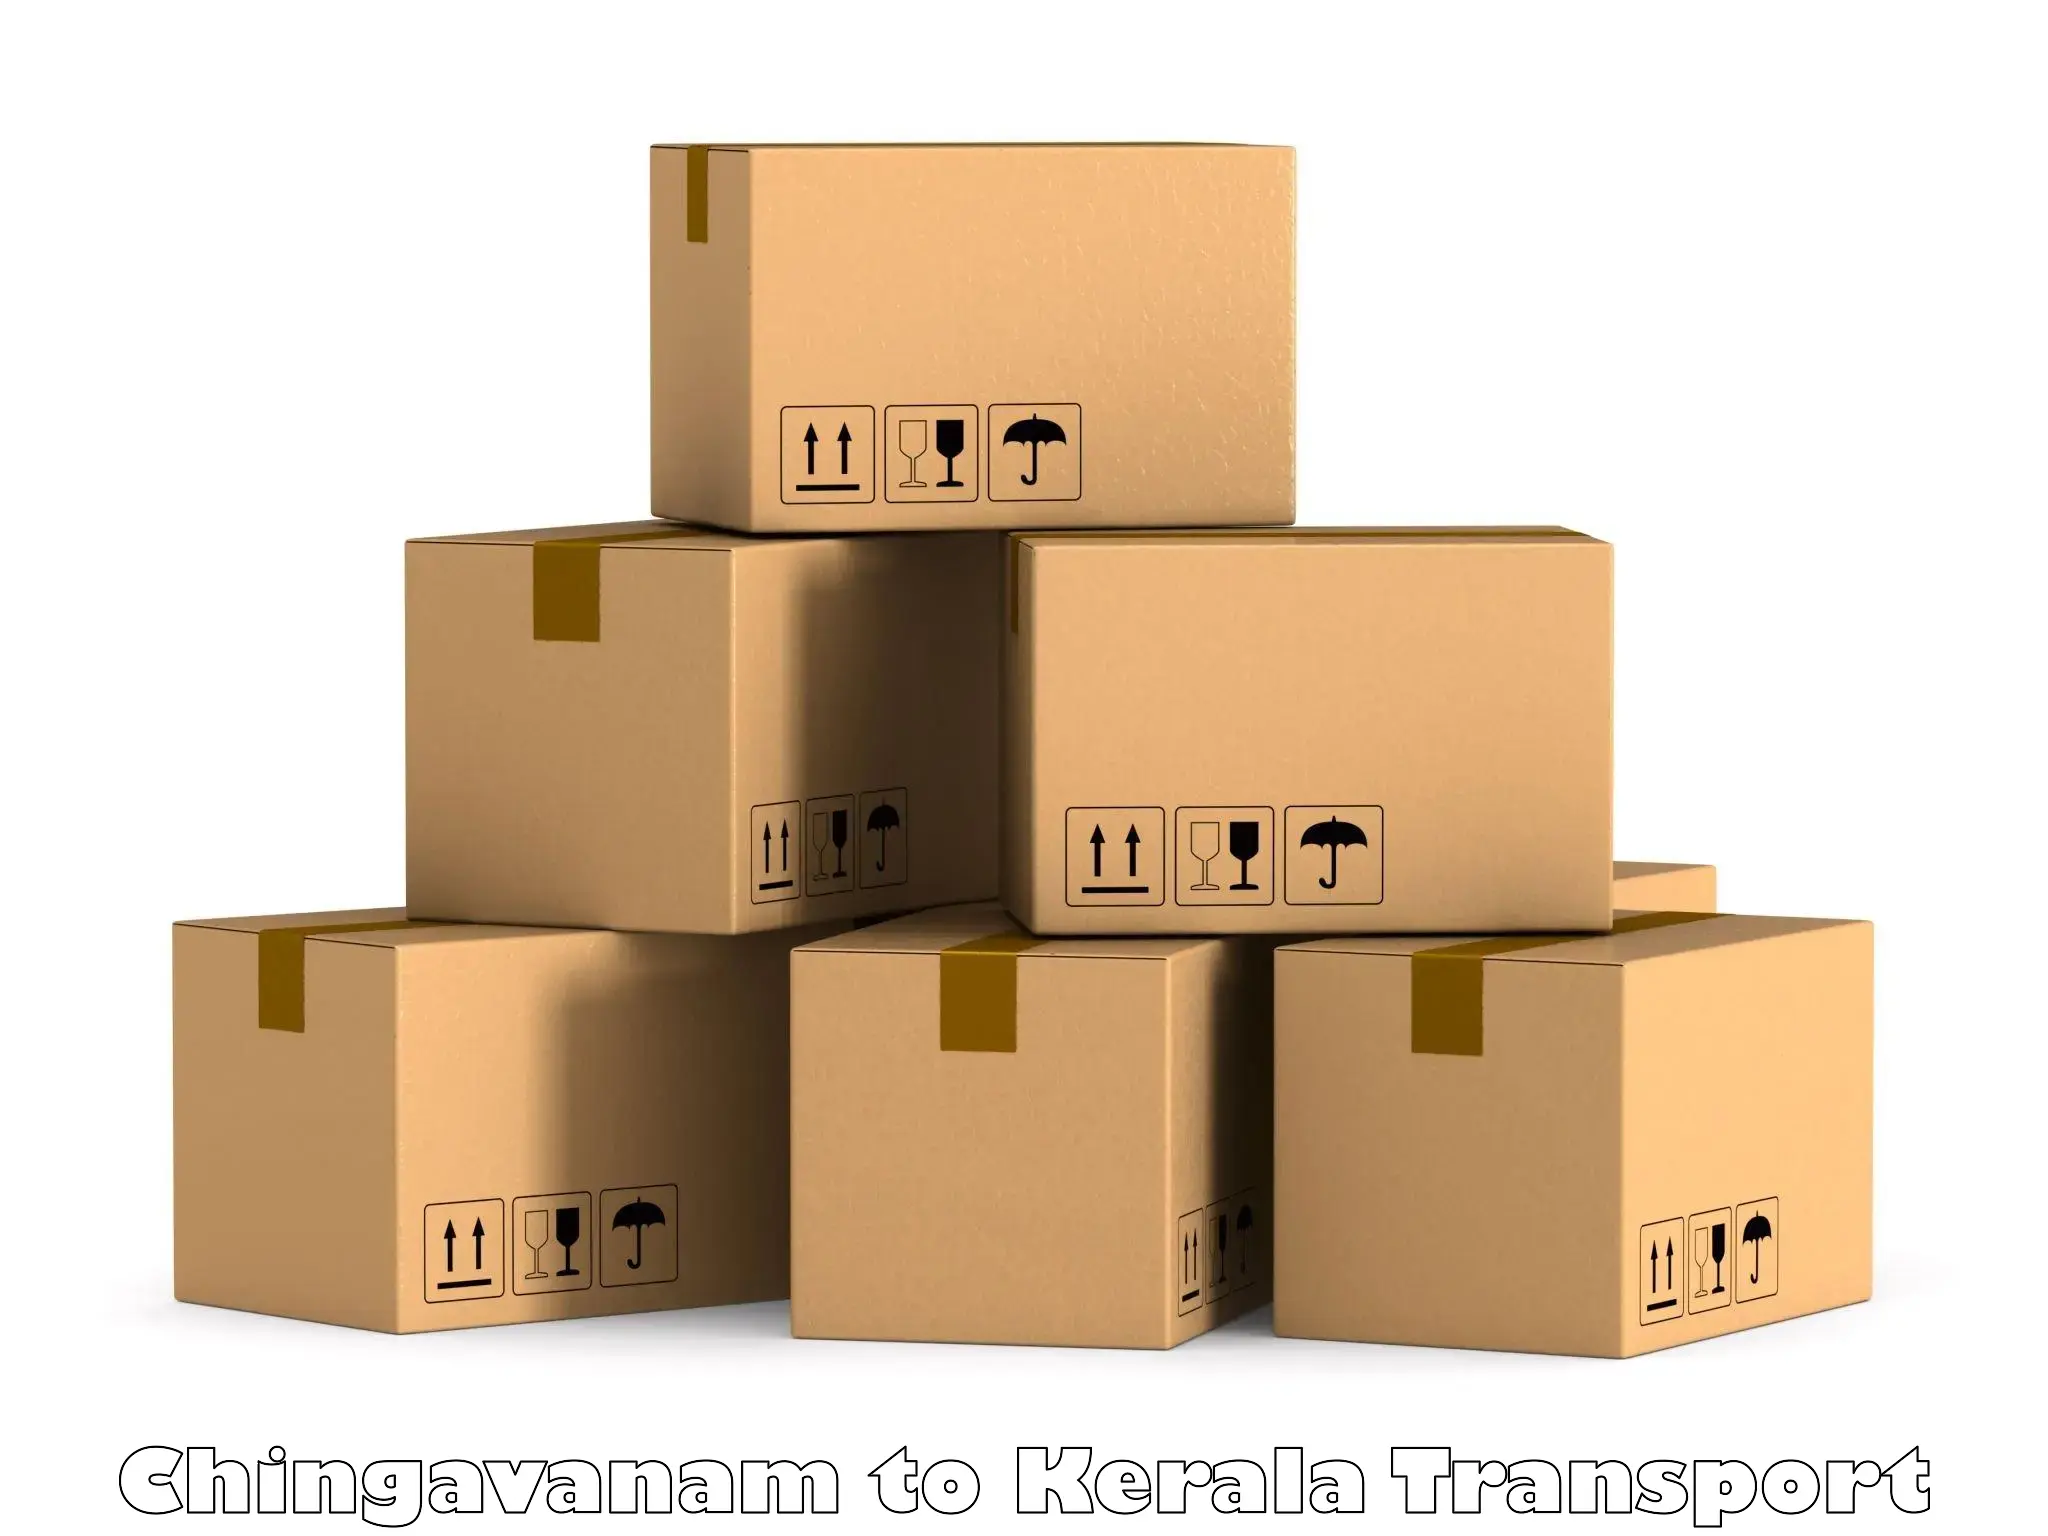 Transportation solution services in Chingavanam to Alappuzha